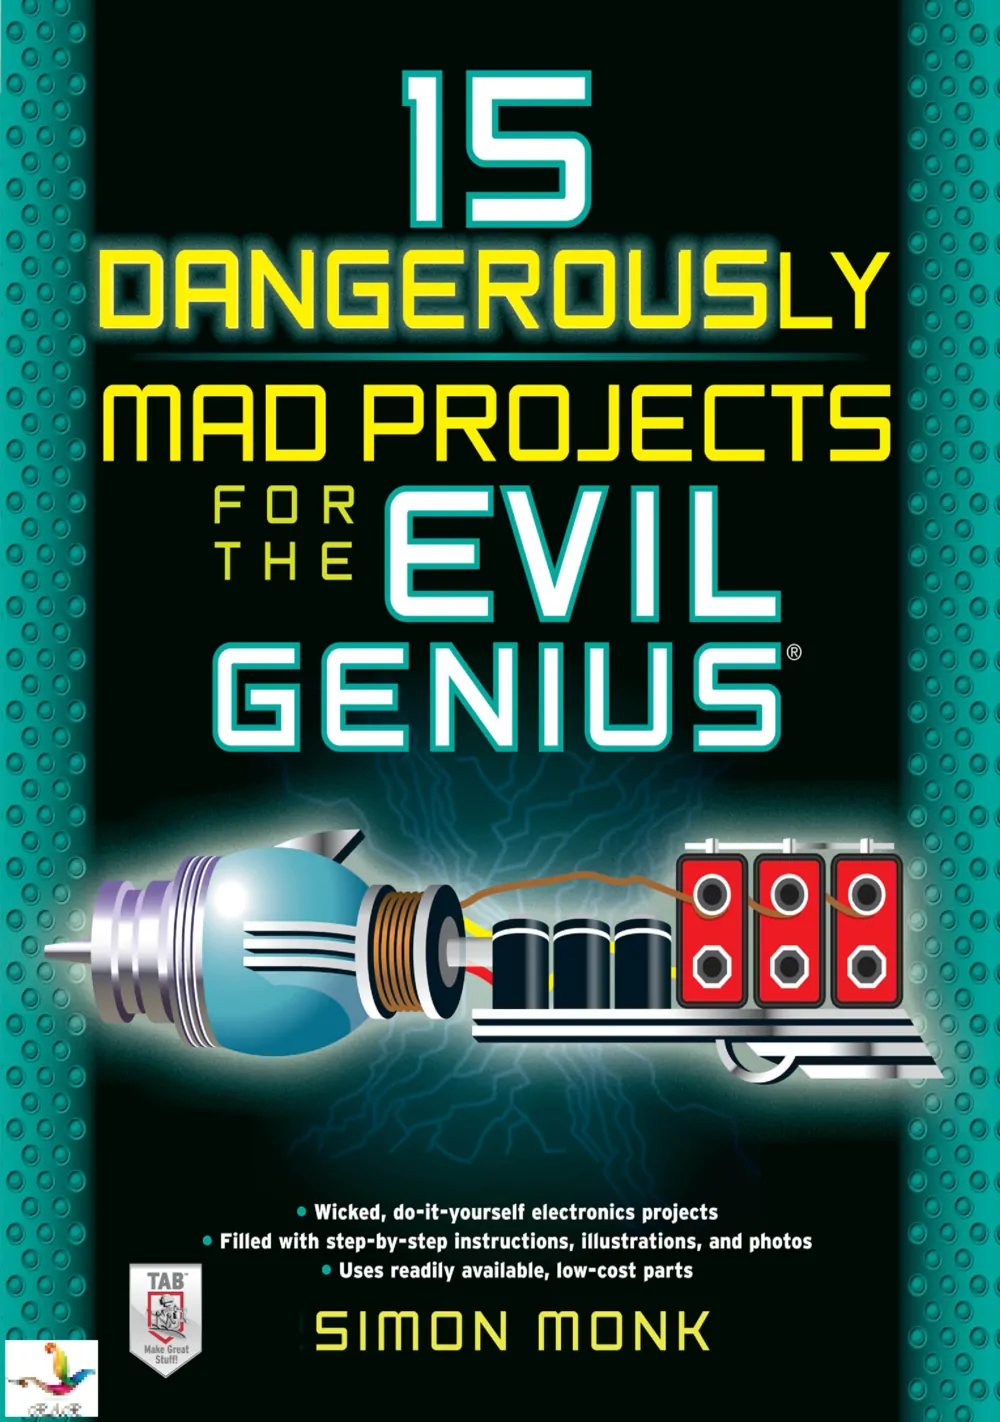 15 Dangerously Mad Projects